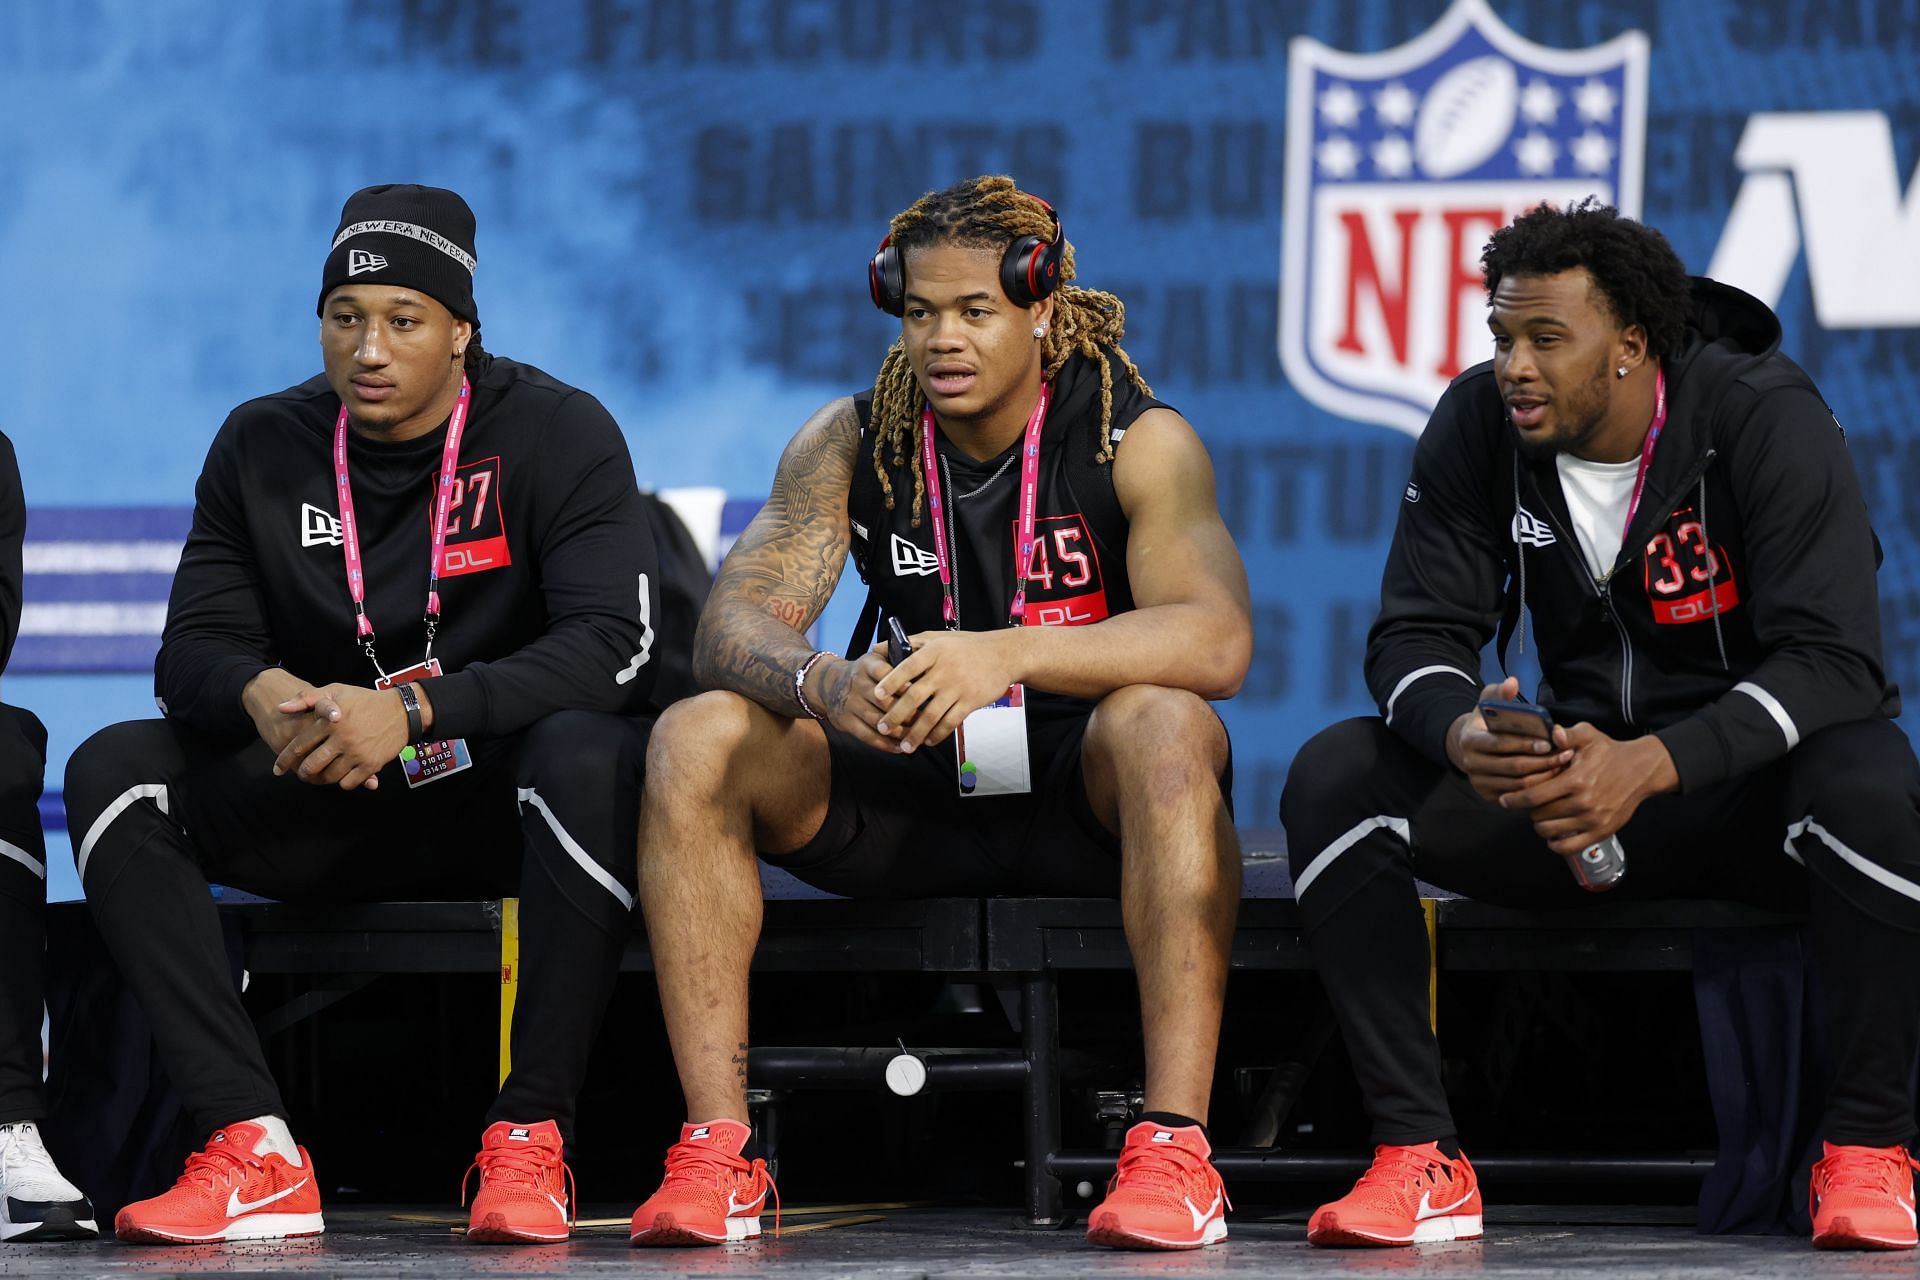 NFL Combine 2023: Full schedule of workouts, drills, and media interviews -  Acme Packing Company